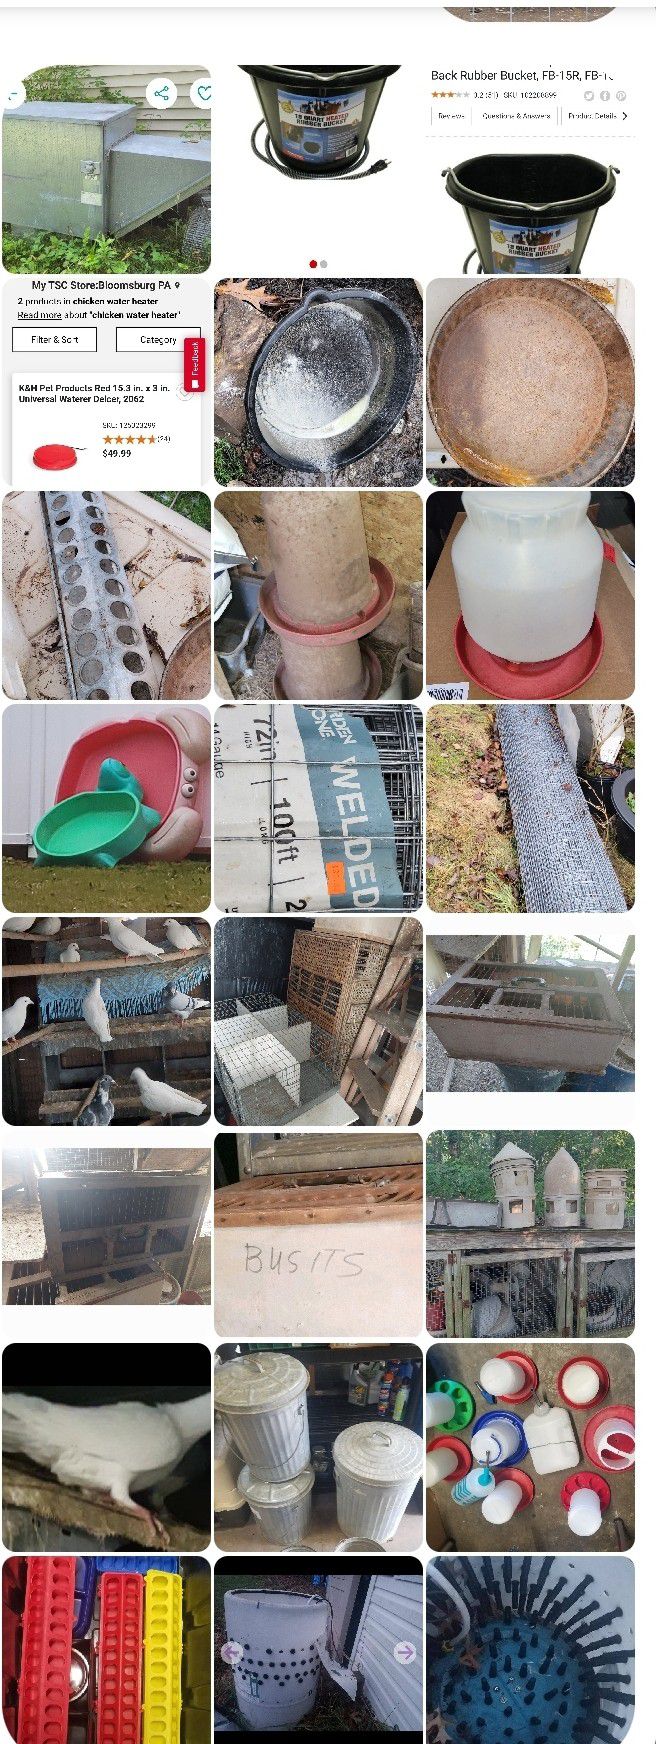 used feed and water dishes